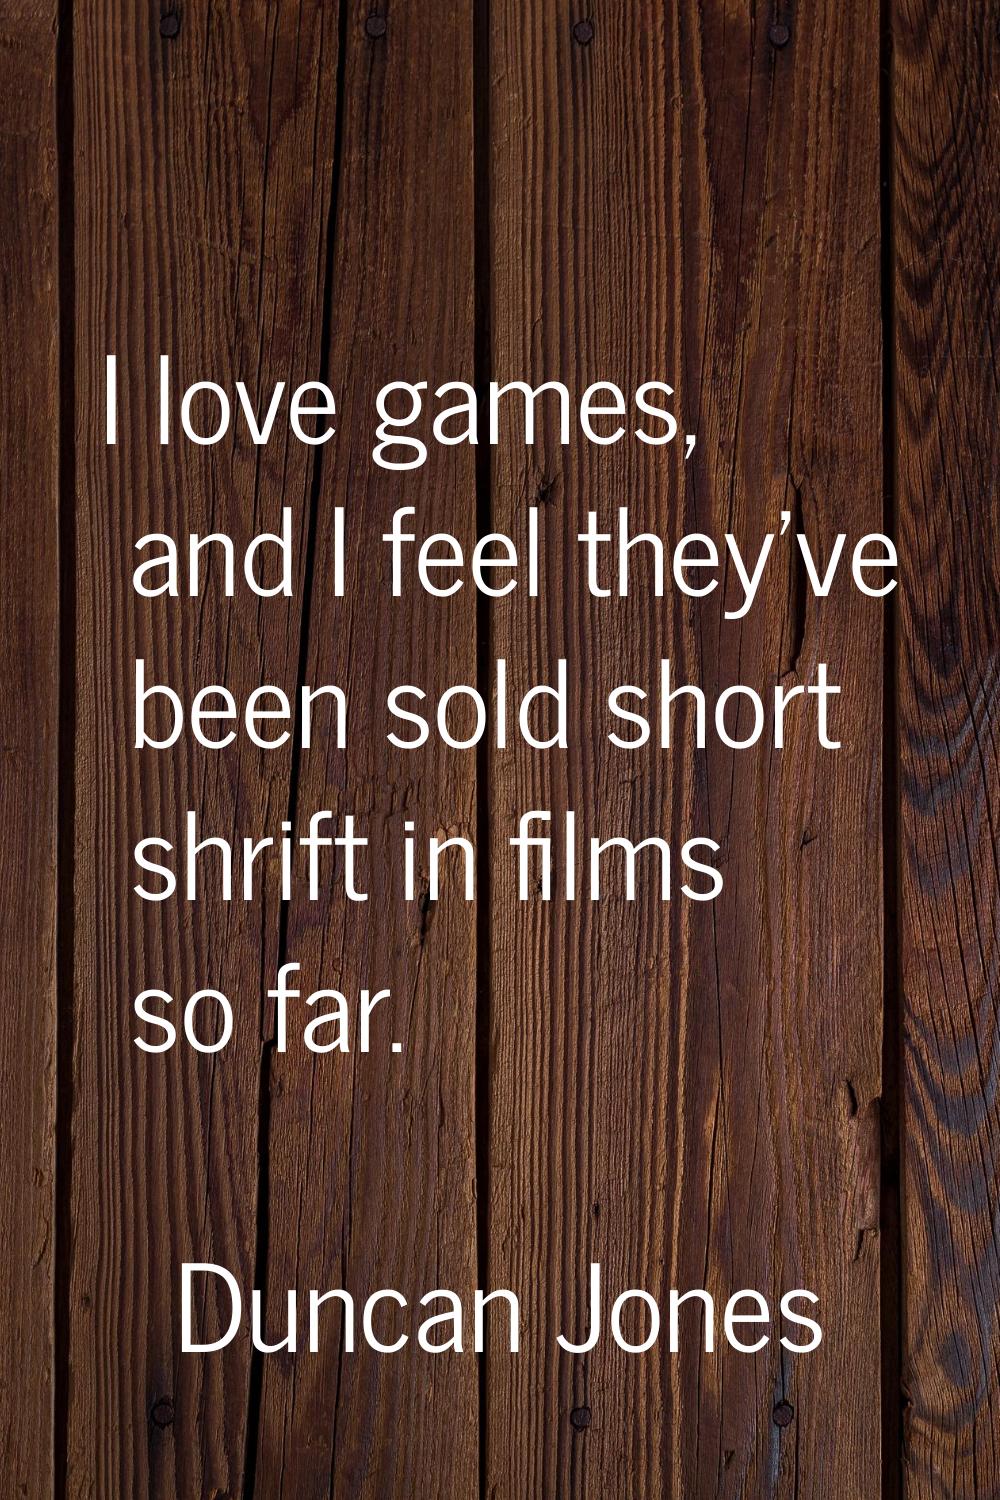 I love games, and I feel they've been sold short shrift in films so far.